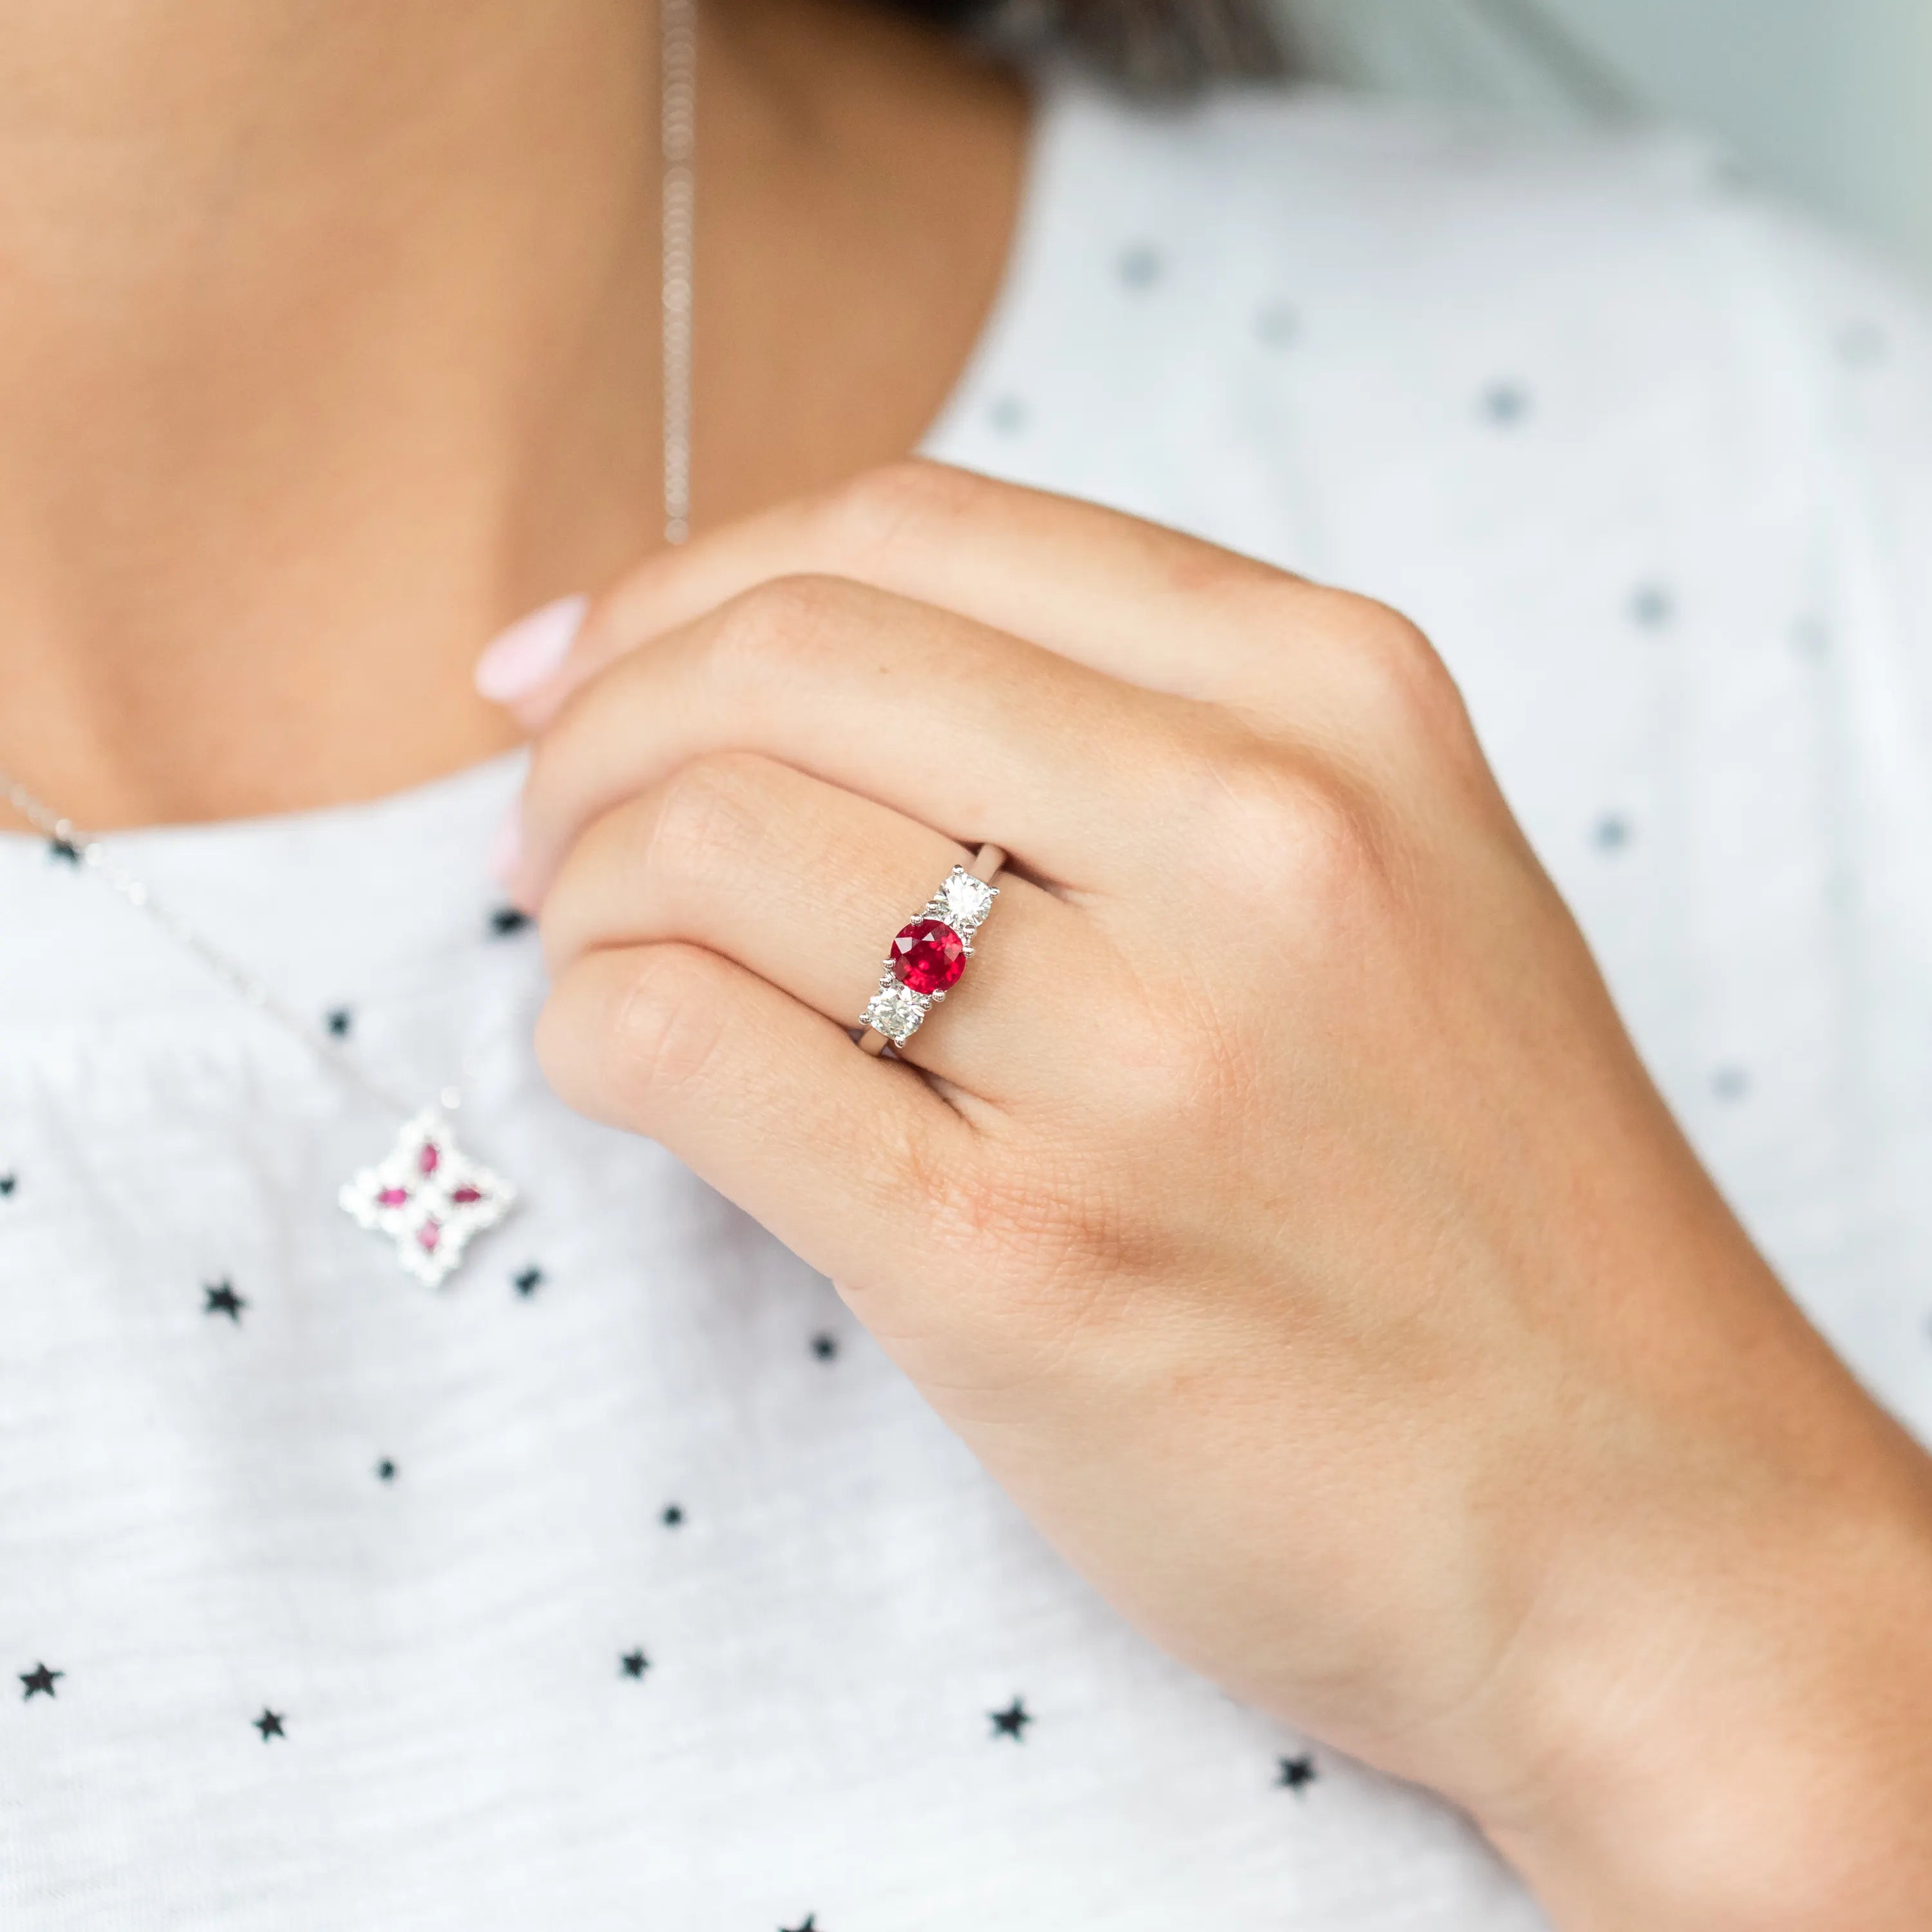 The Story Behind July's Birthstone - The Ruby